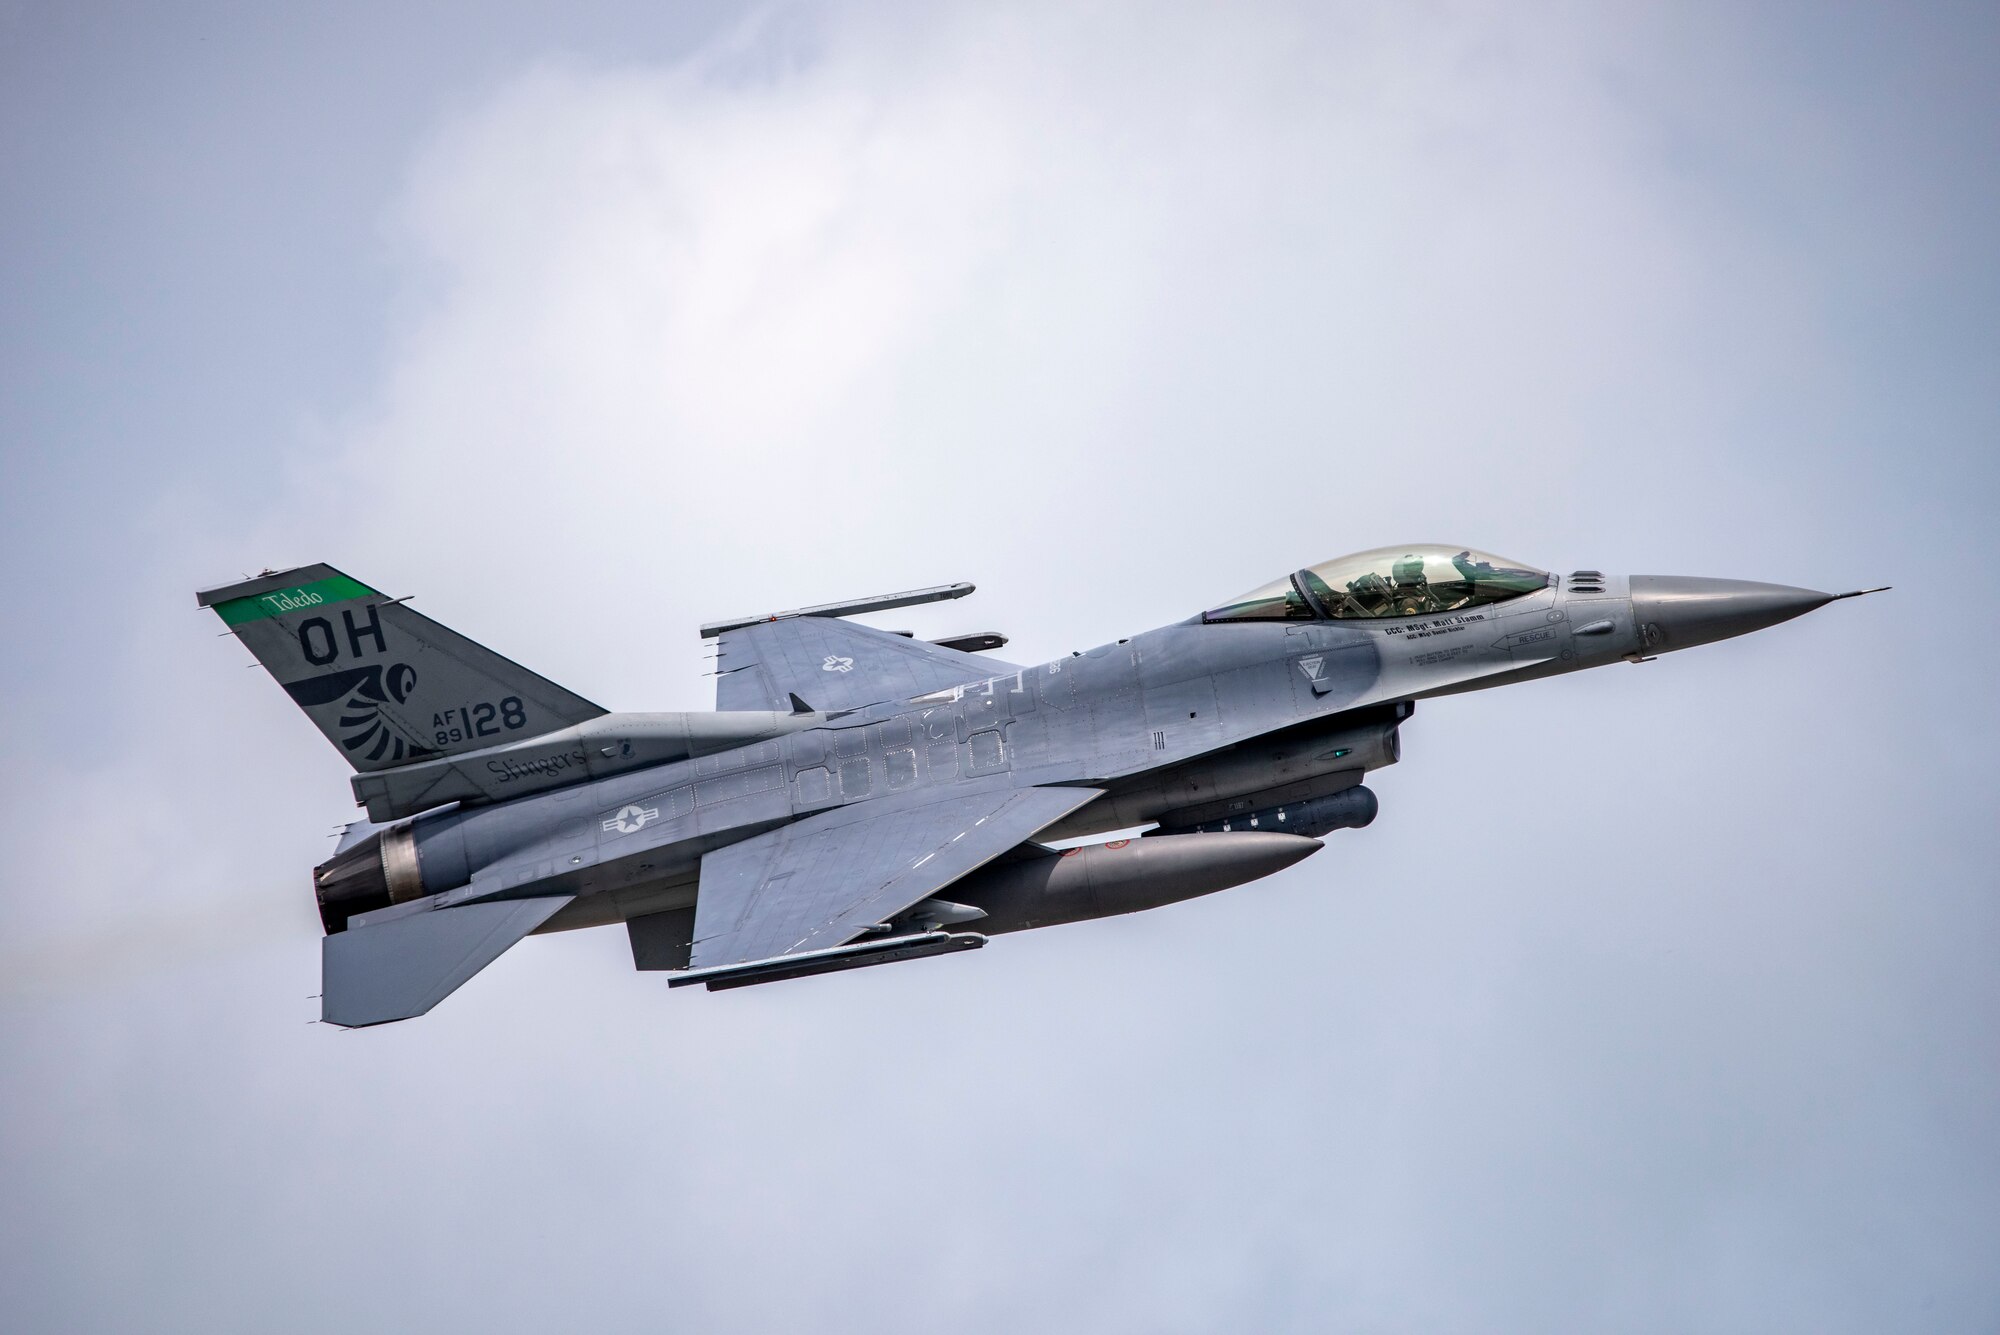 U.S. Air Force Capt. William Ross, an F-16 Fighter Pilot assigned to the Ohio National Guard’s 180th Fighter Wing, takes off in an F-16 Fighting Falcon during a training flight at the 180FW in Swanton, Ohio, July 30, 2020.